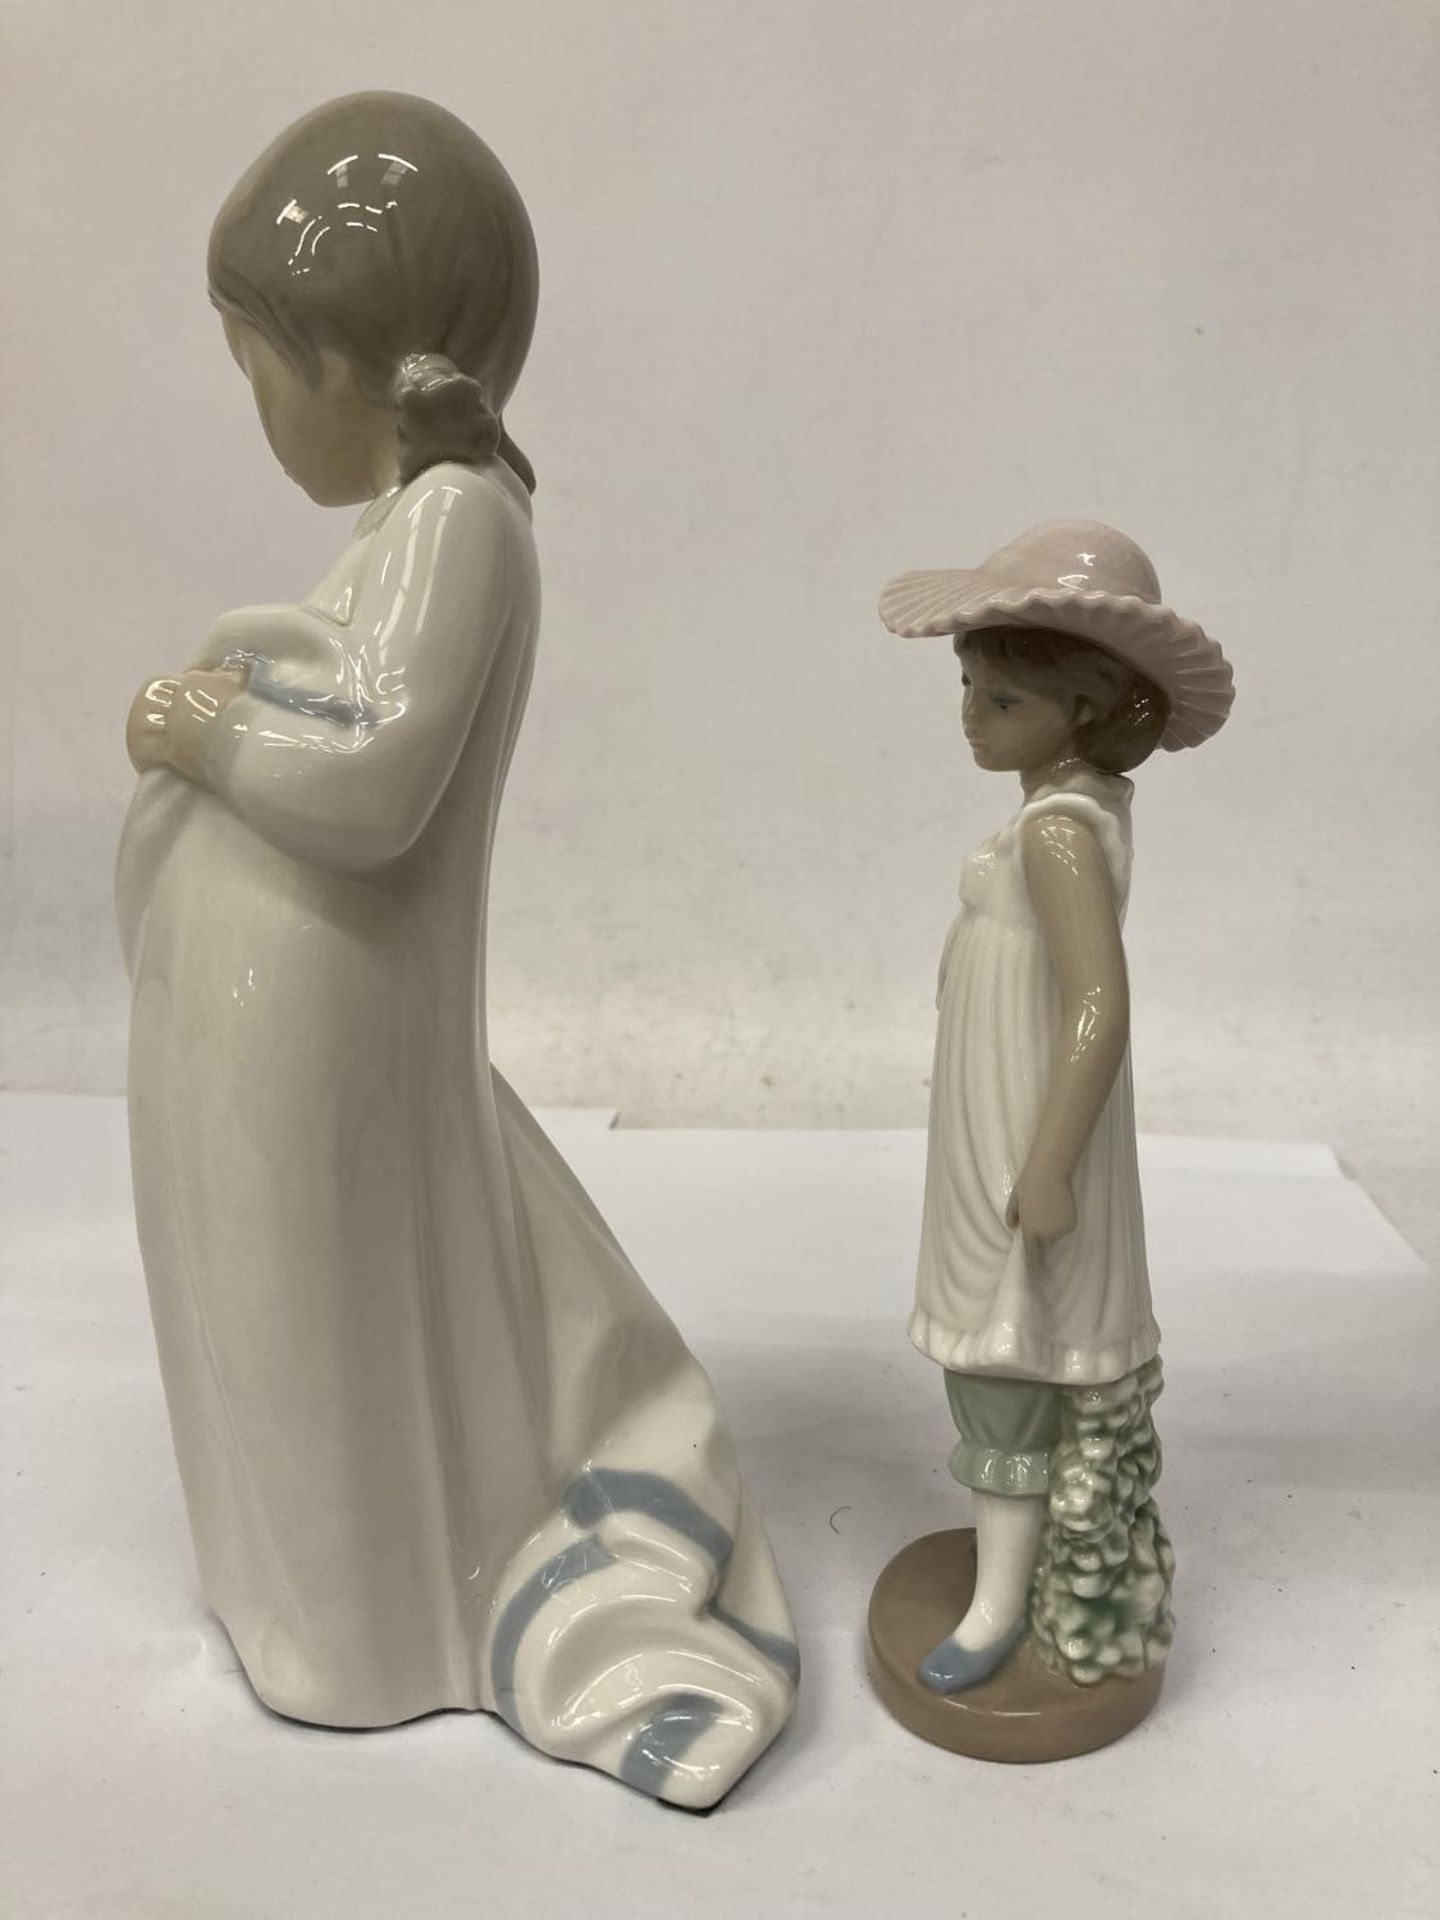 TWO NAO FIGURINES ONE HOLDING A BLANKET AND THE OTHER AN UMBRELLA - Image 4 of 7